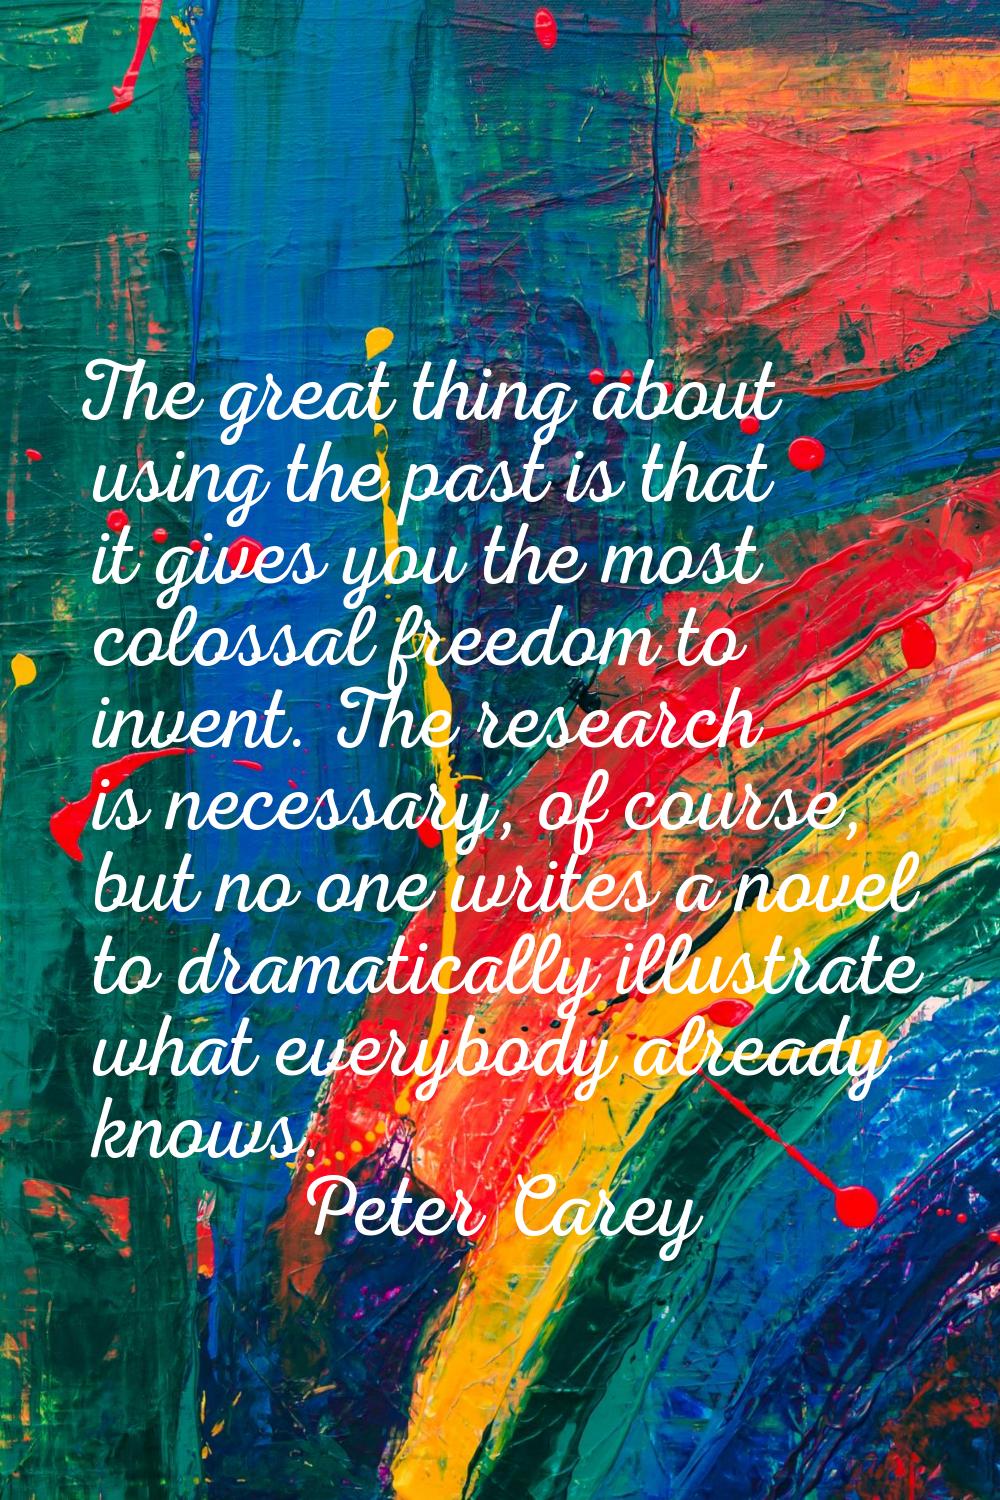 The great thing about using the past is that it gives you the most colossal freedom to invent. The 